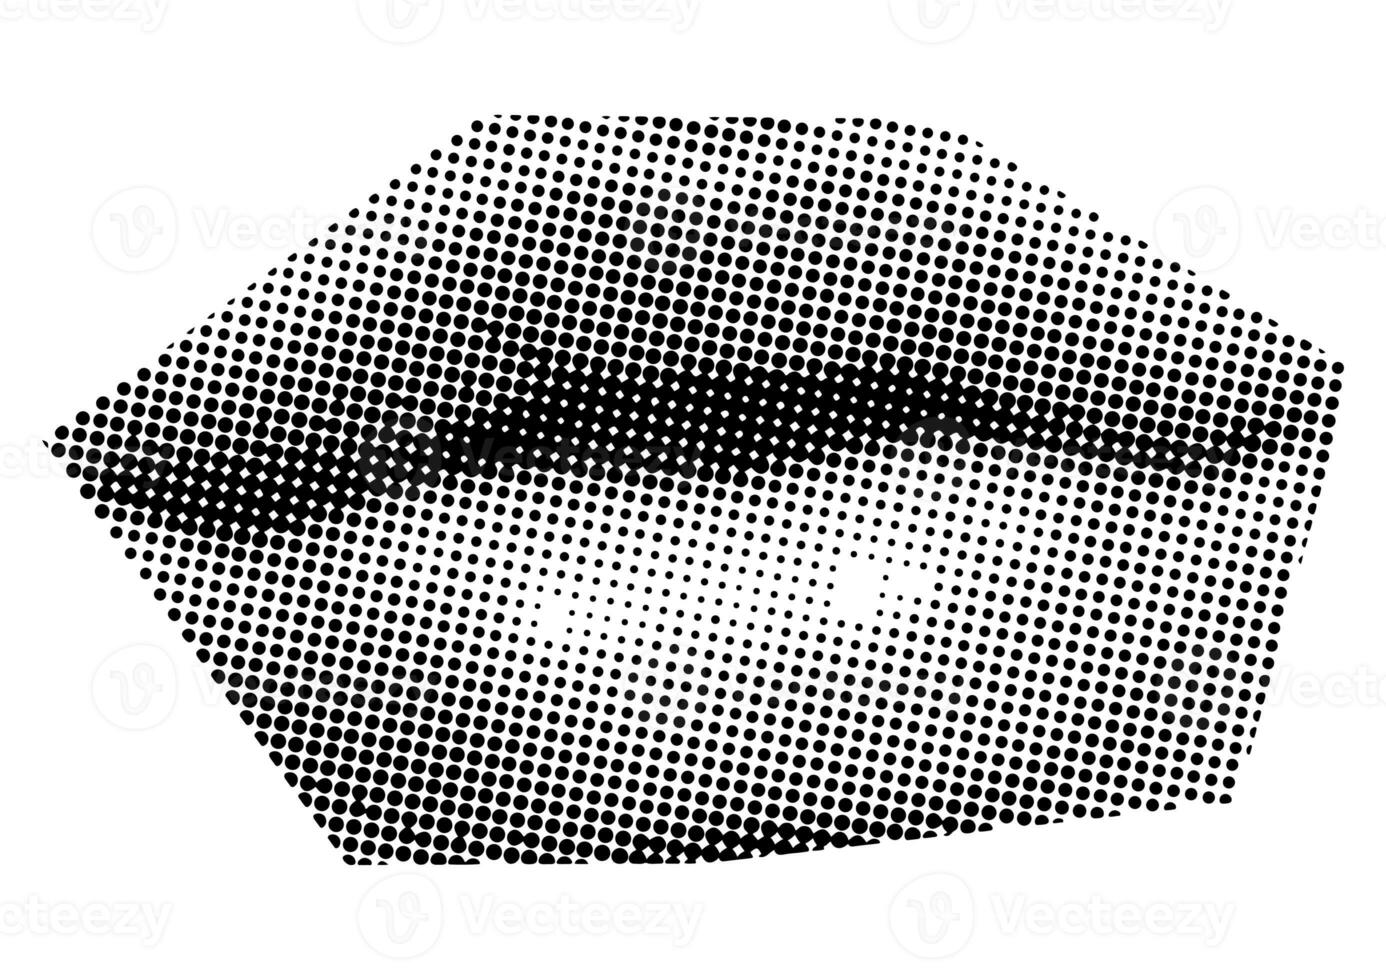 Mouth and lips, smile, tongue, dots Punk y2k black and white collage elements photo